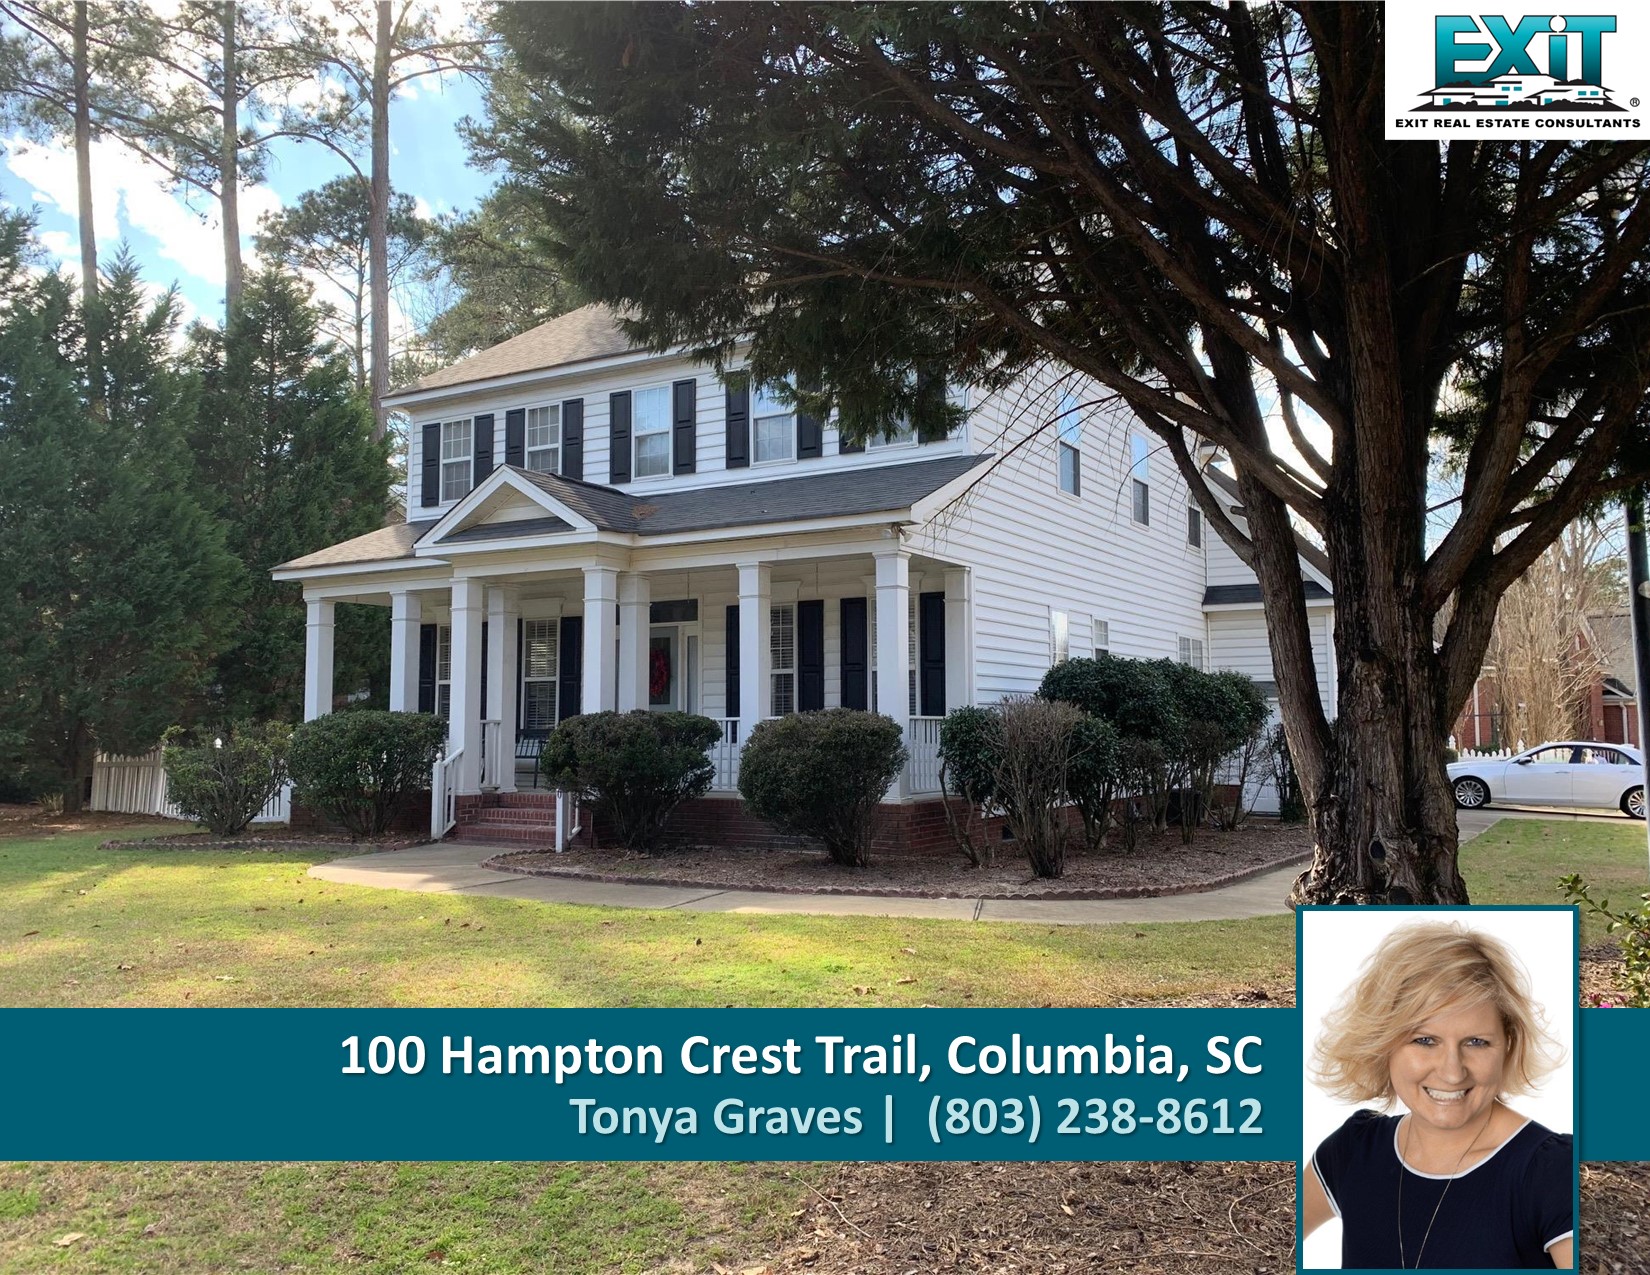 Just listed in Hampton Crest